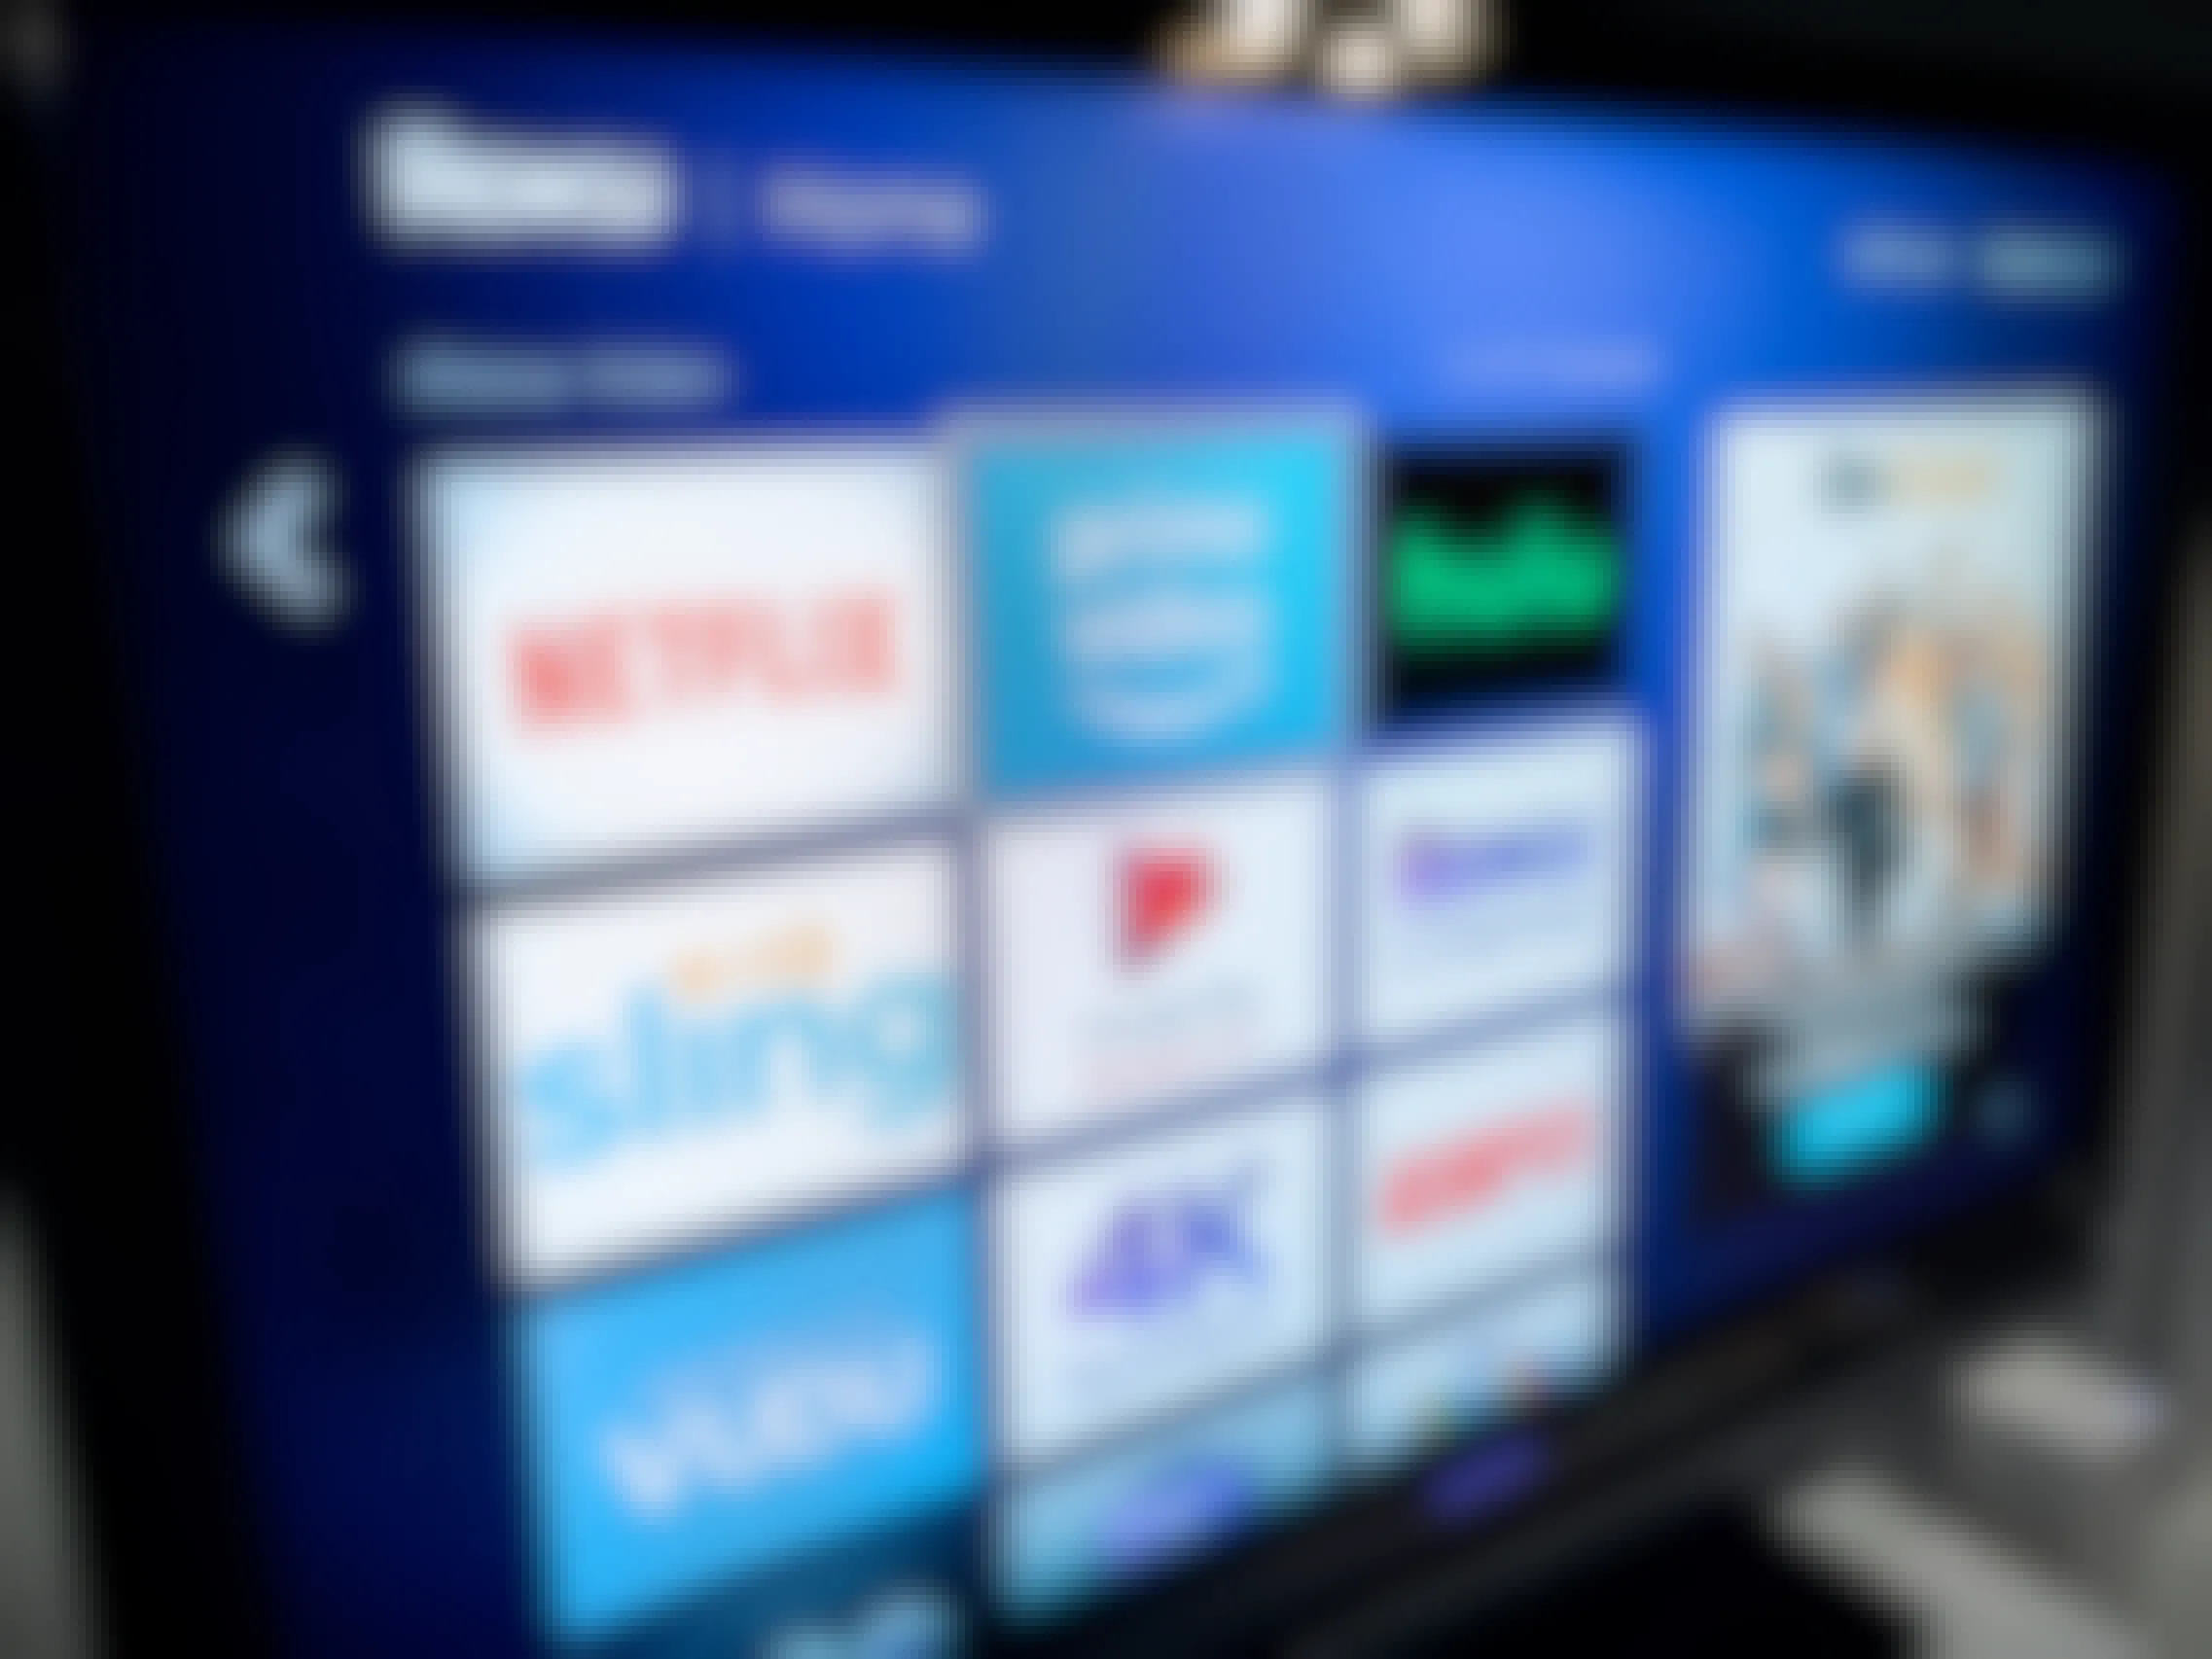 roku screen with different streaming apps like hulu and amazon prime video available